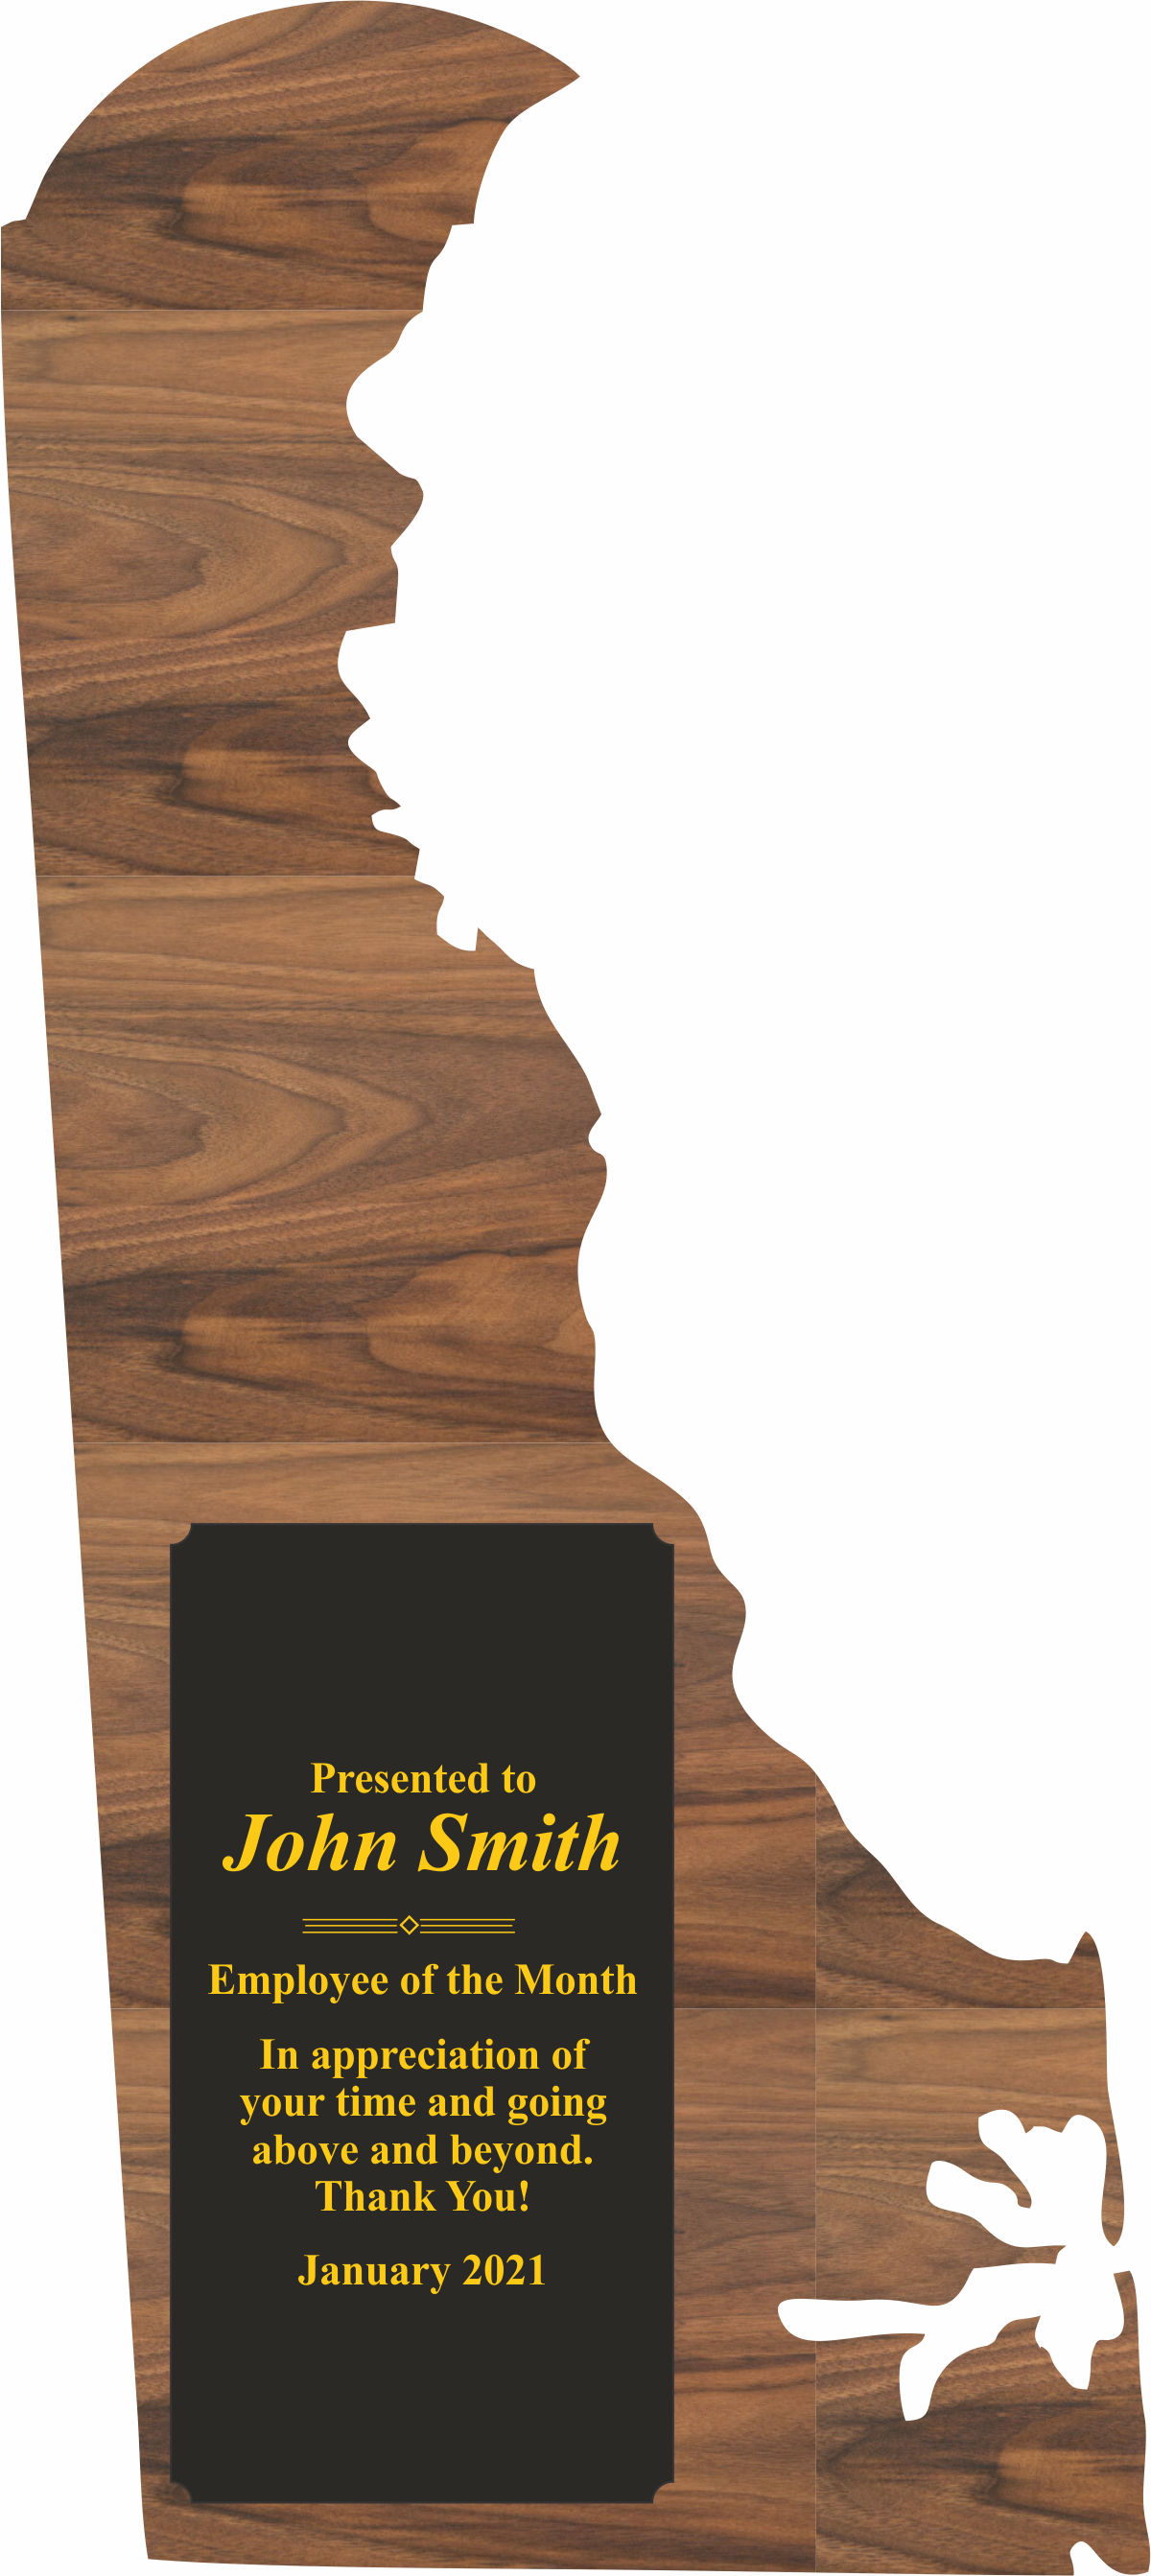 Delaware State Shaped Plaques, Custom Engraved With Your Logo!